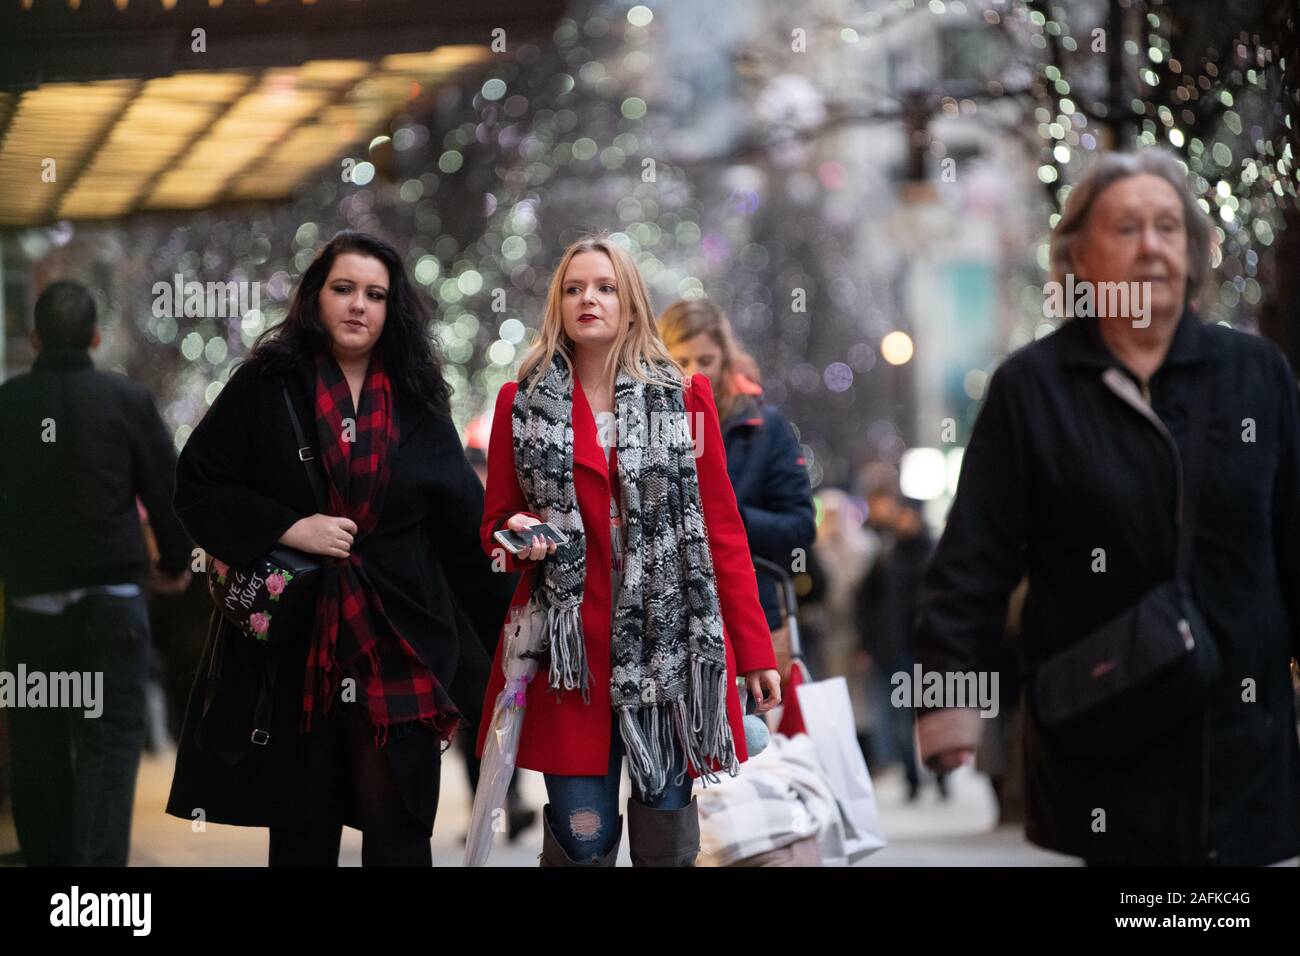 Christmas shoppers, one wearing a red coat, doing late Christmas shopping, outside Selfridges, Oxford Street, London, UK Stock Photo